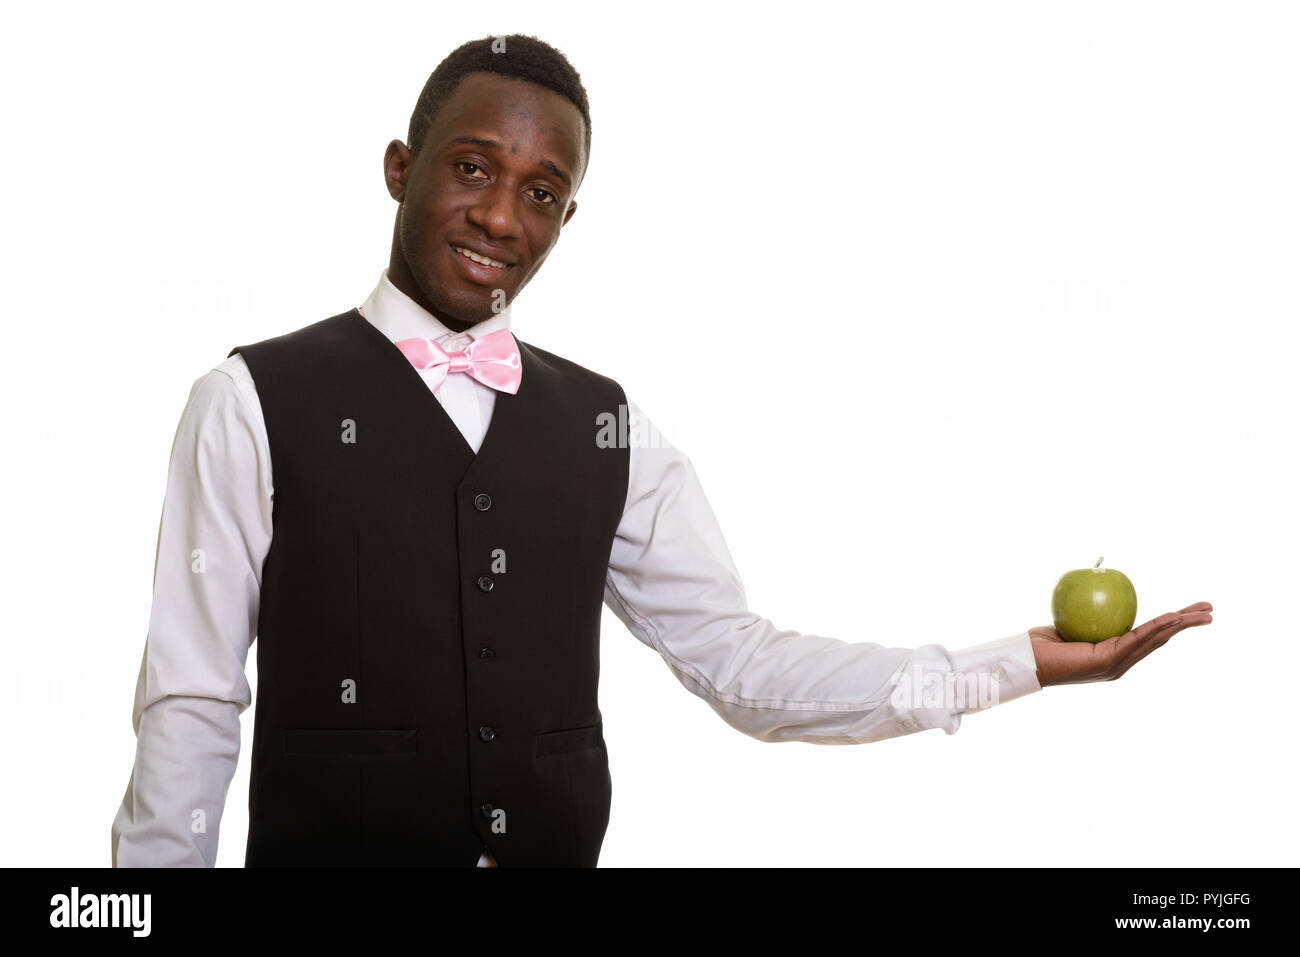 Les jeunes Africains heureux waiter smiling and holding green apple Banque D'Images